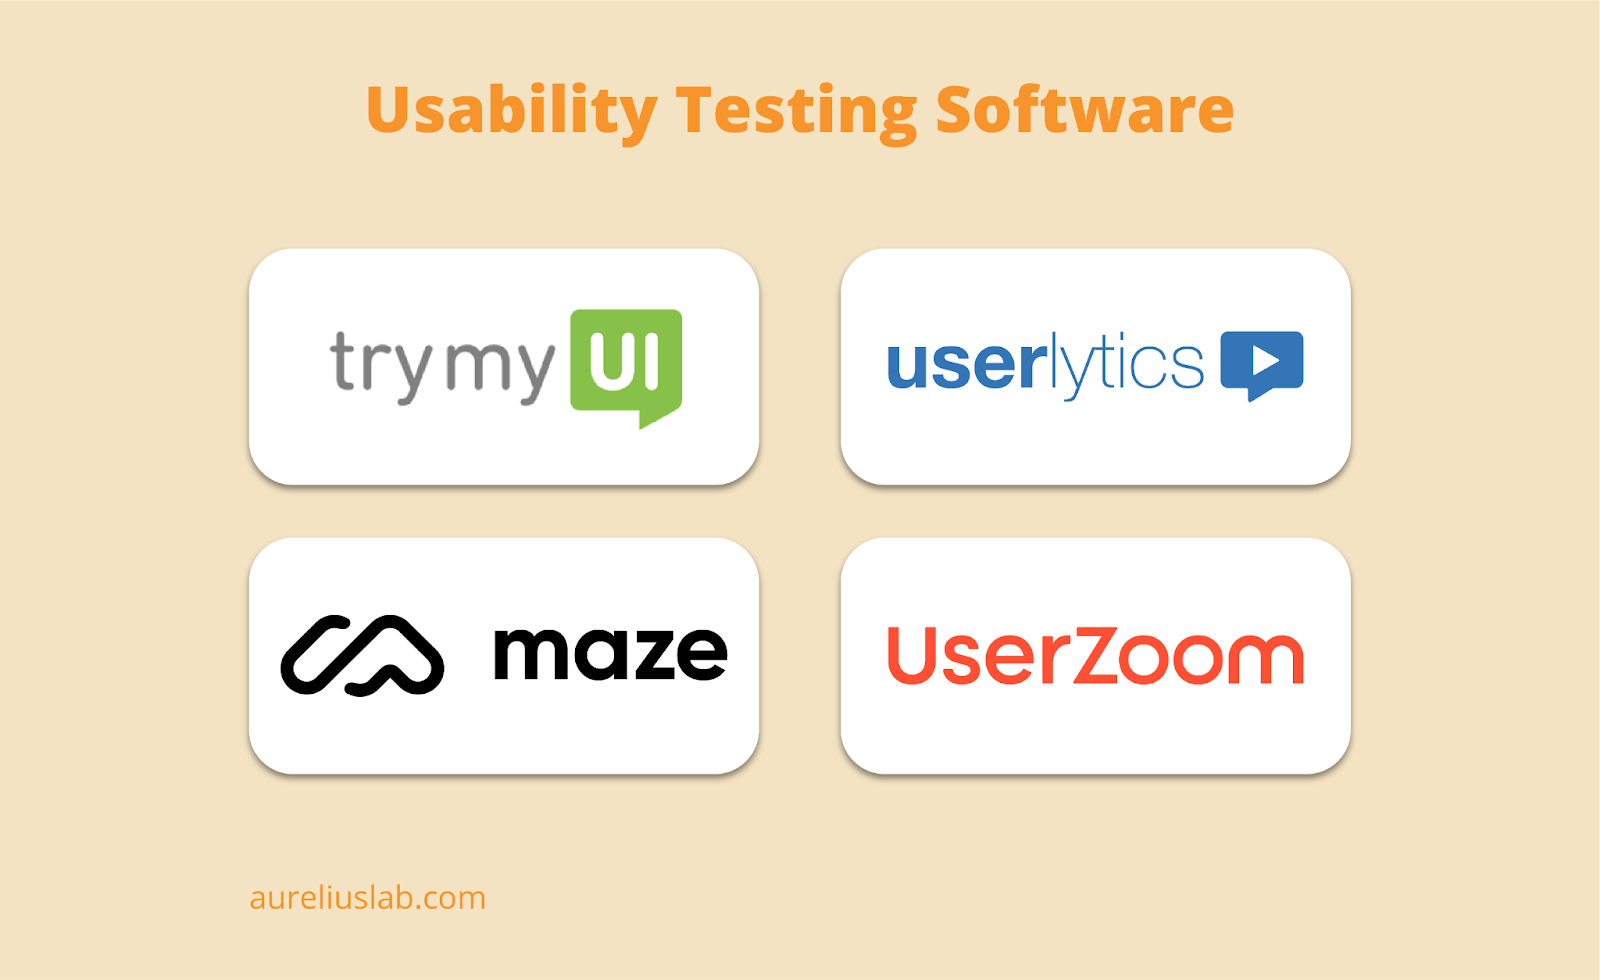 Usability testing software for UX research